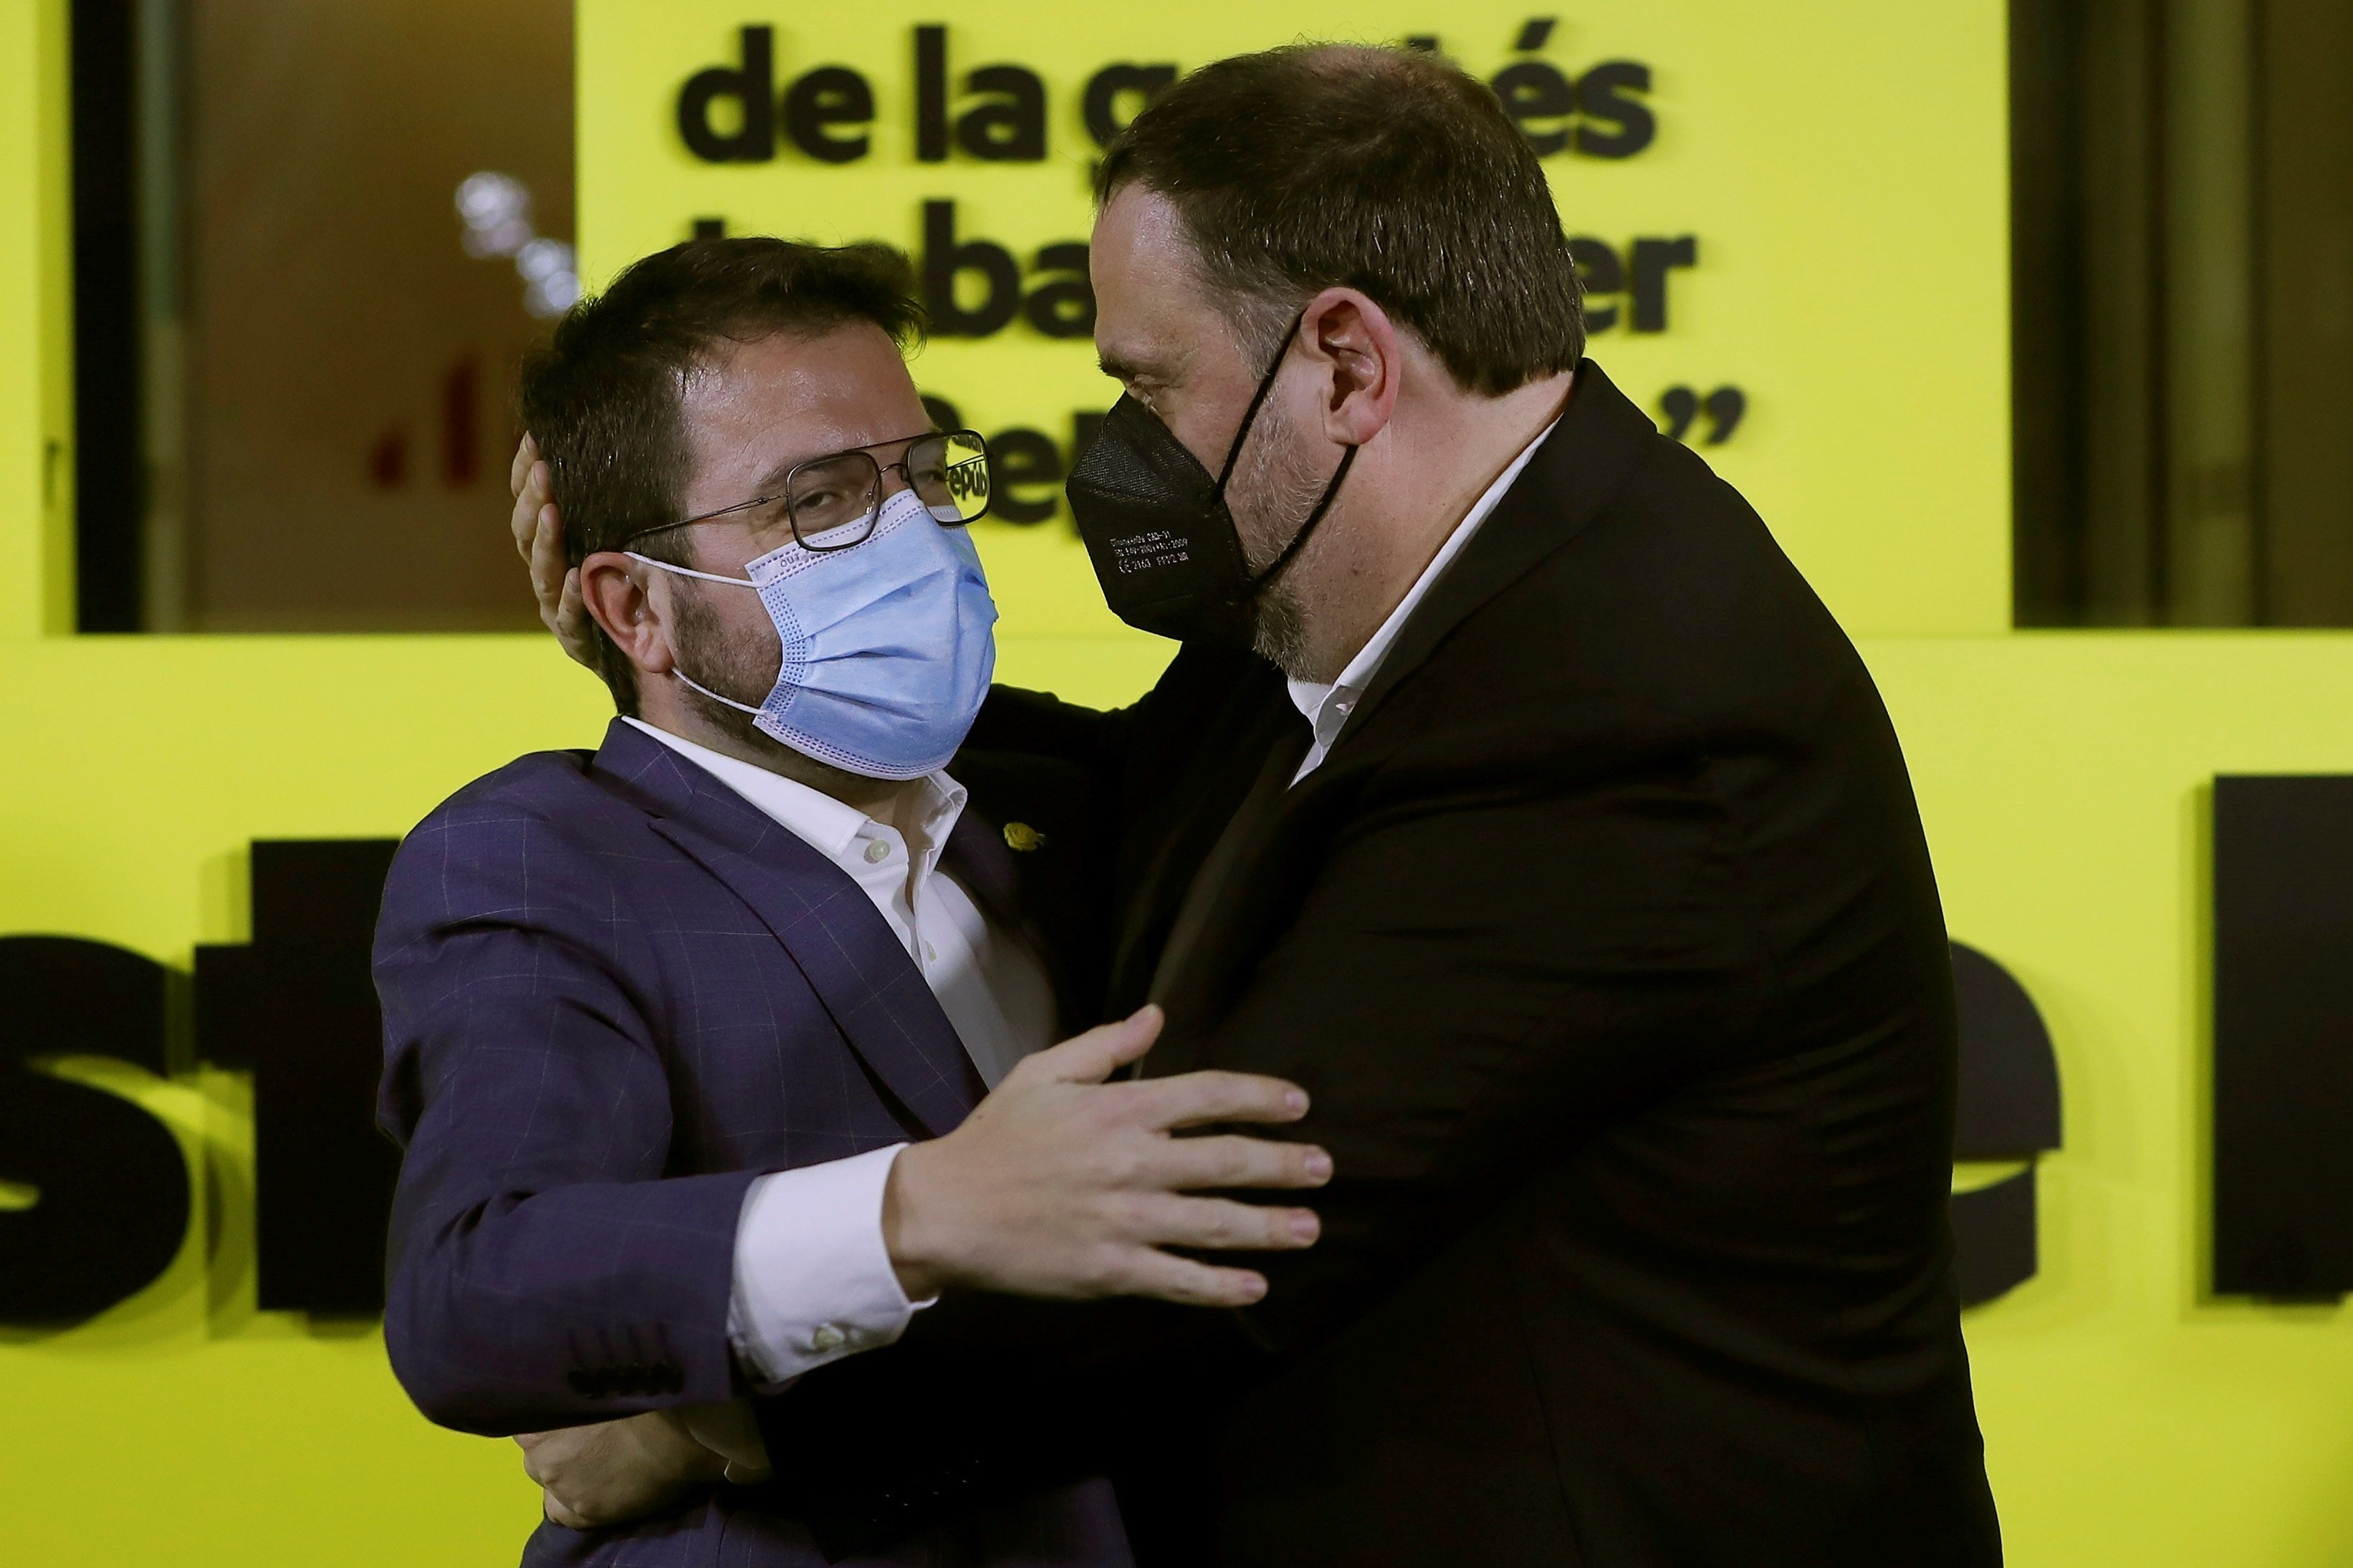 Independence bloc wins in Catalan vote with ERC able to lead, as Socialists fall short